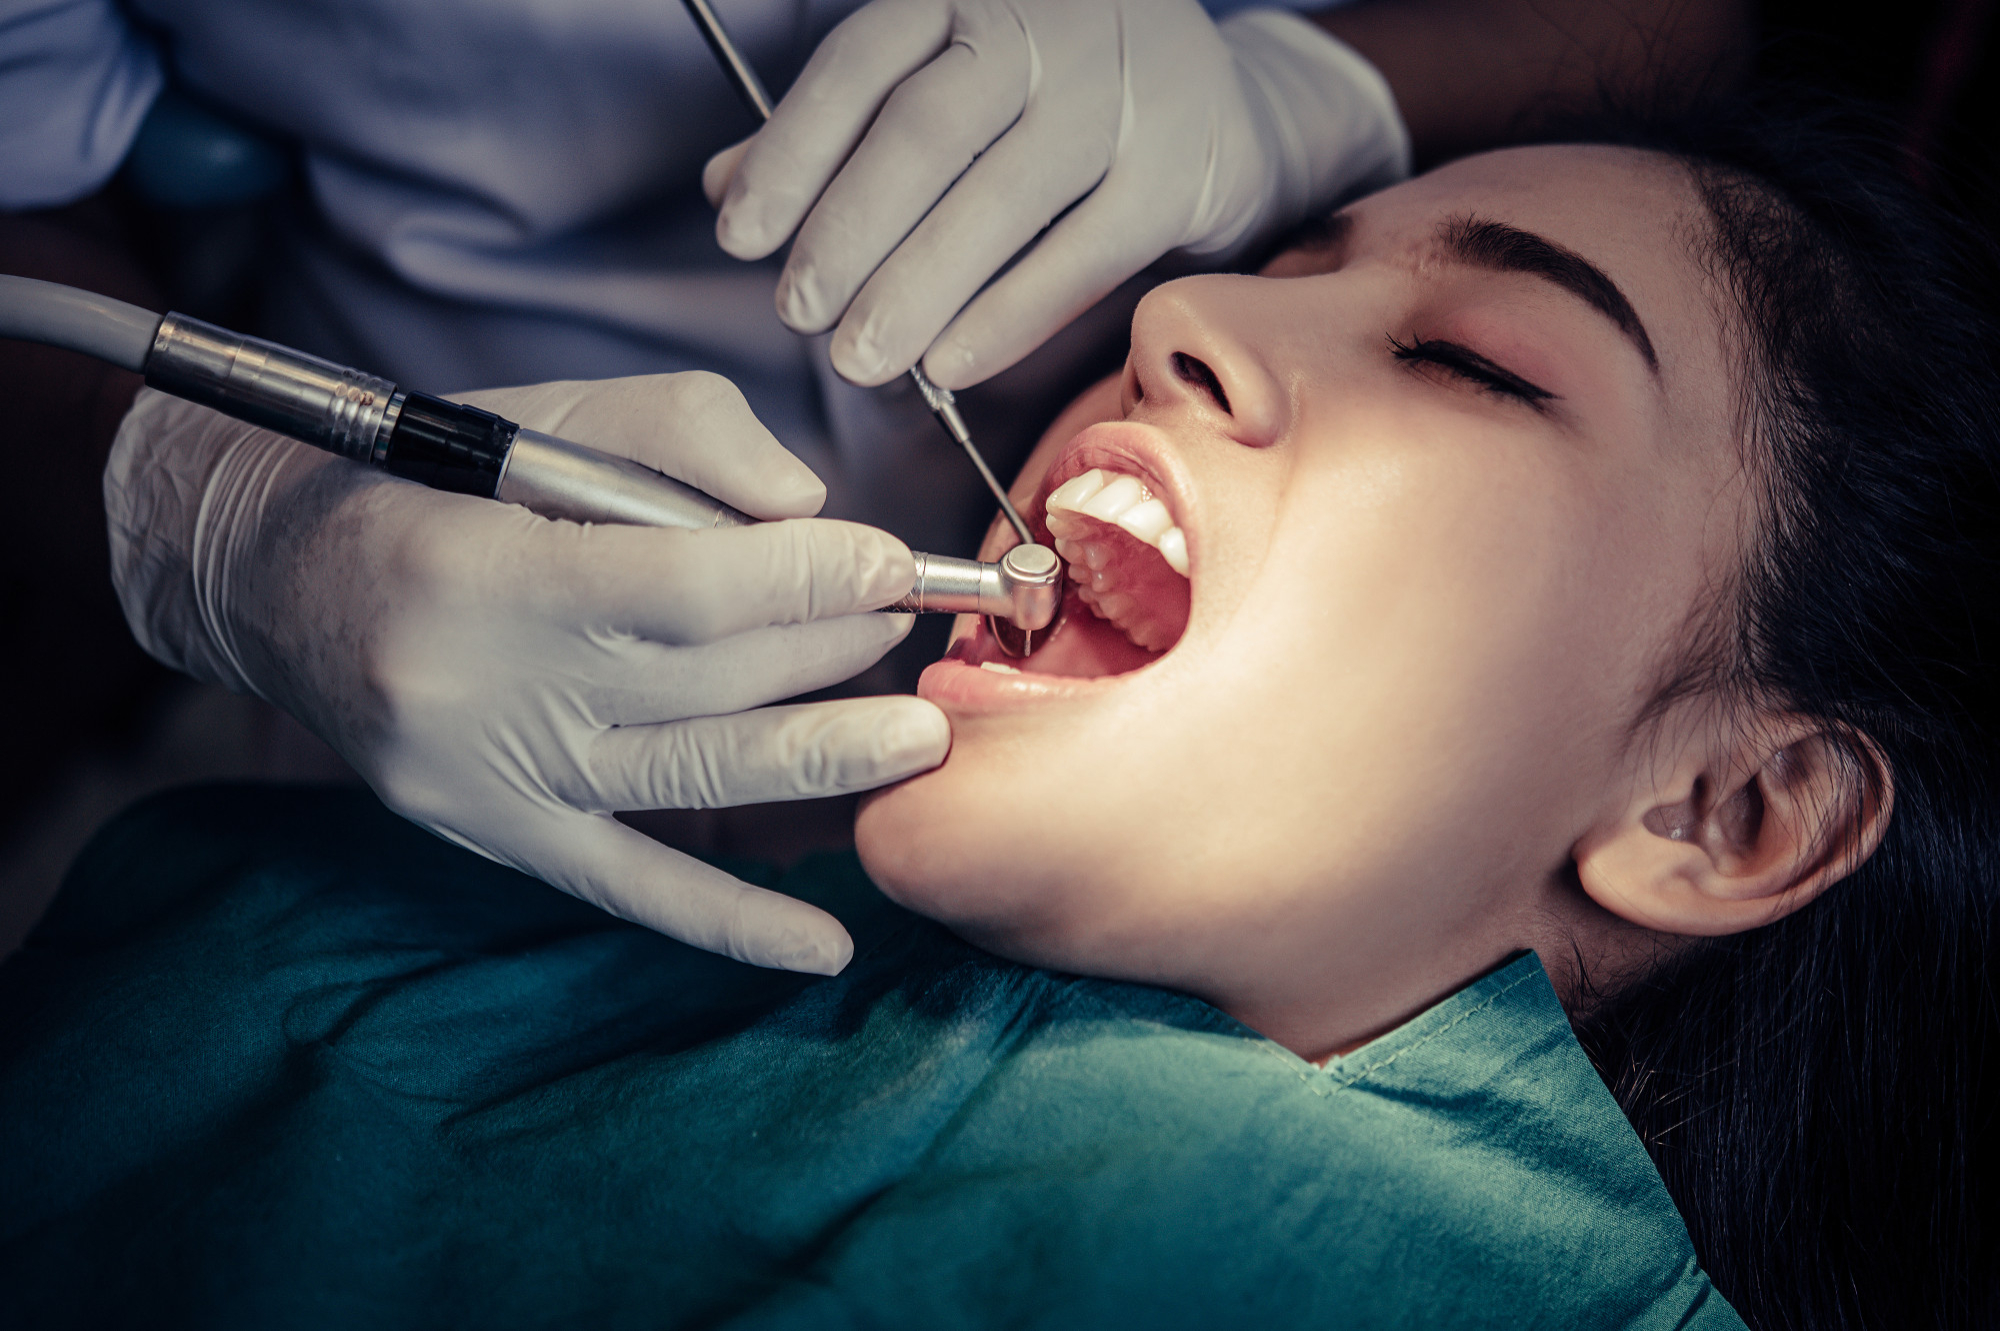 A young lady under the lights on a dentist’s chair undergoing a procedure